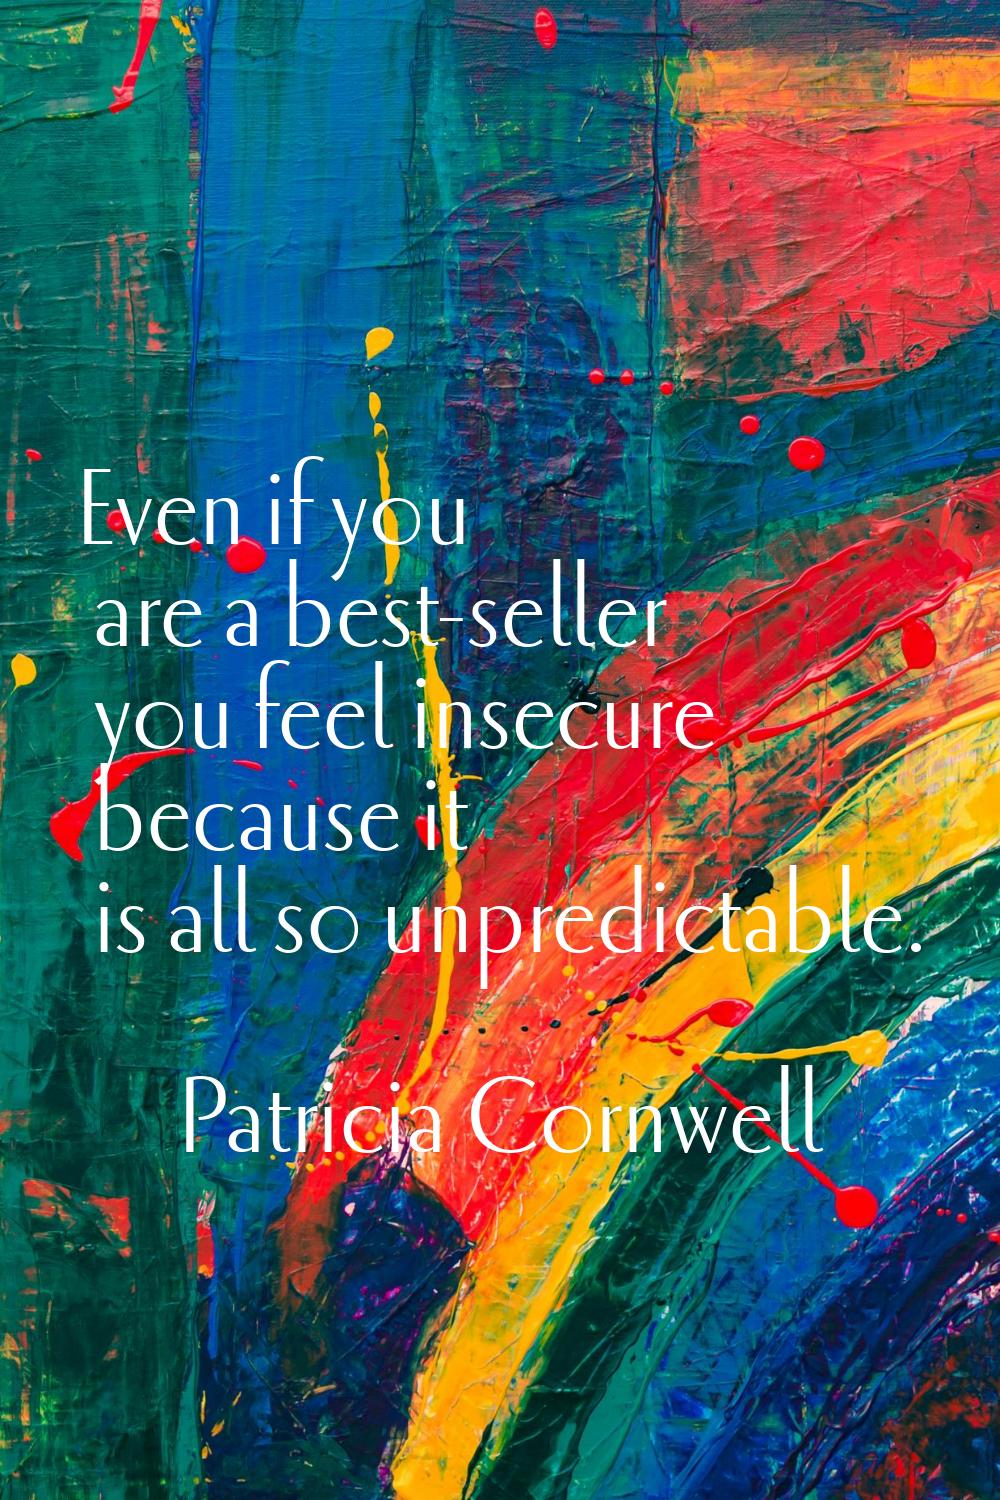 Even if you are a best-seller you feel insecure because it is all so unpredictable.